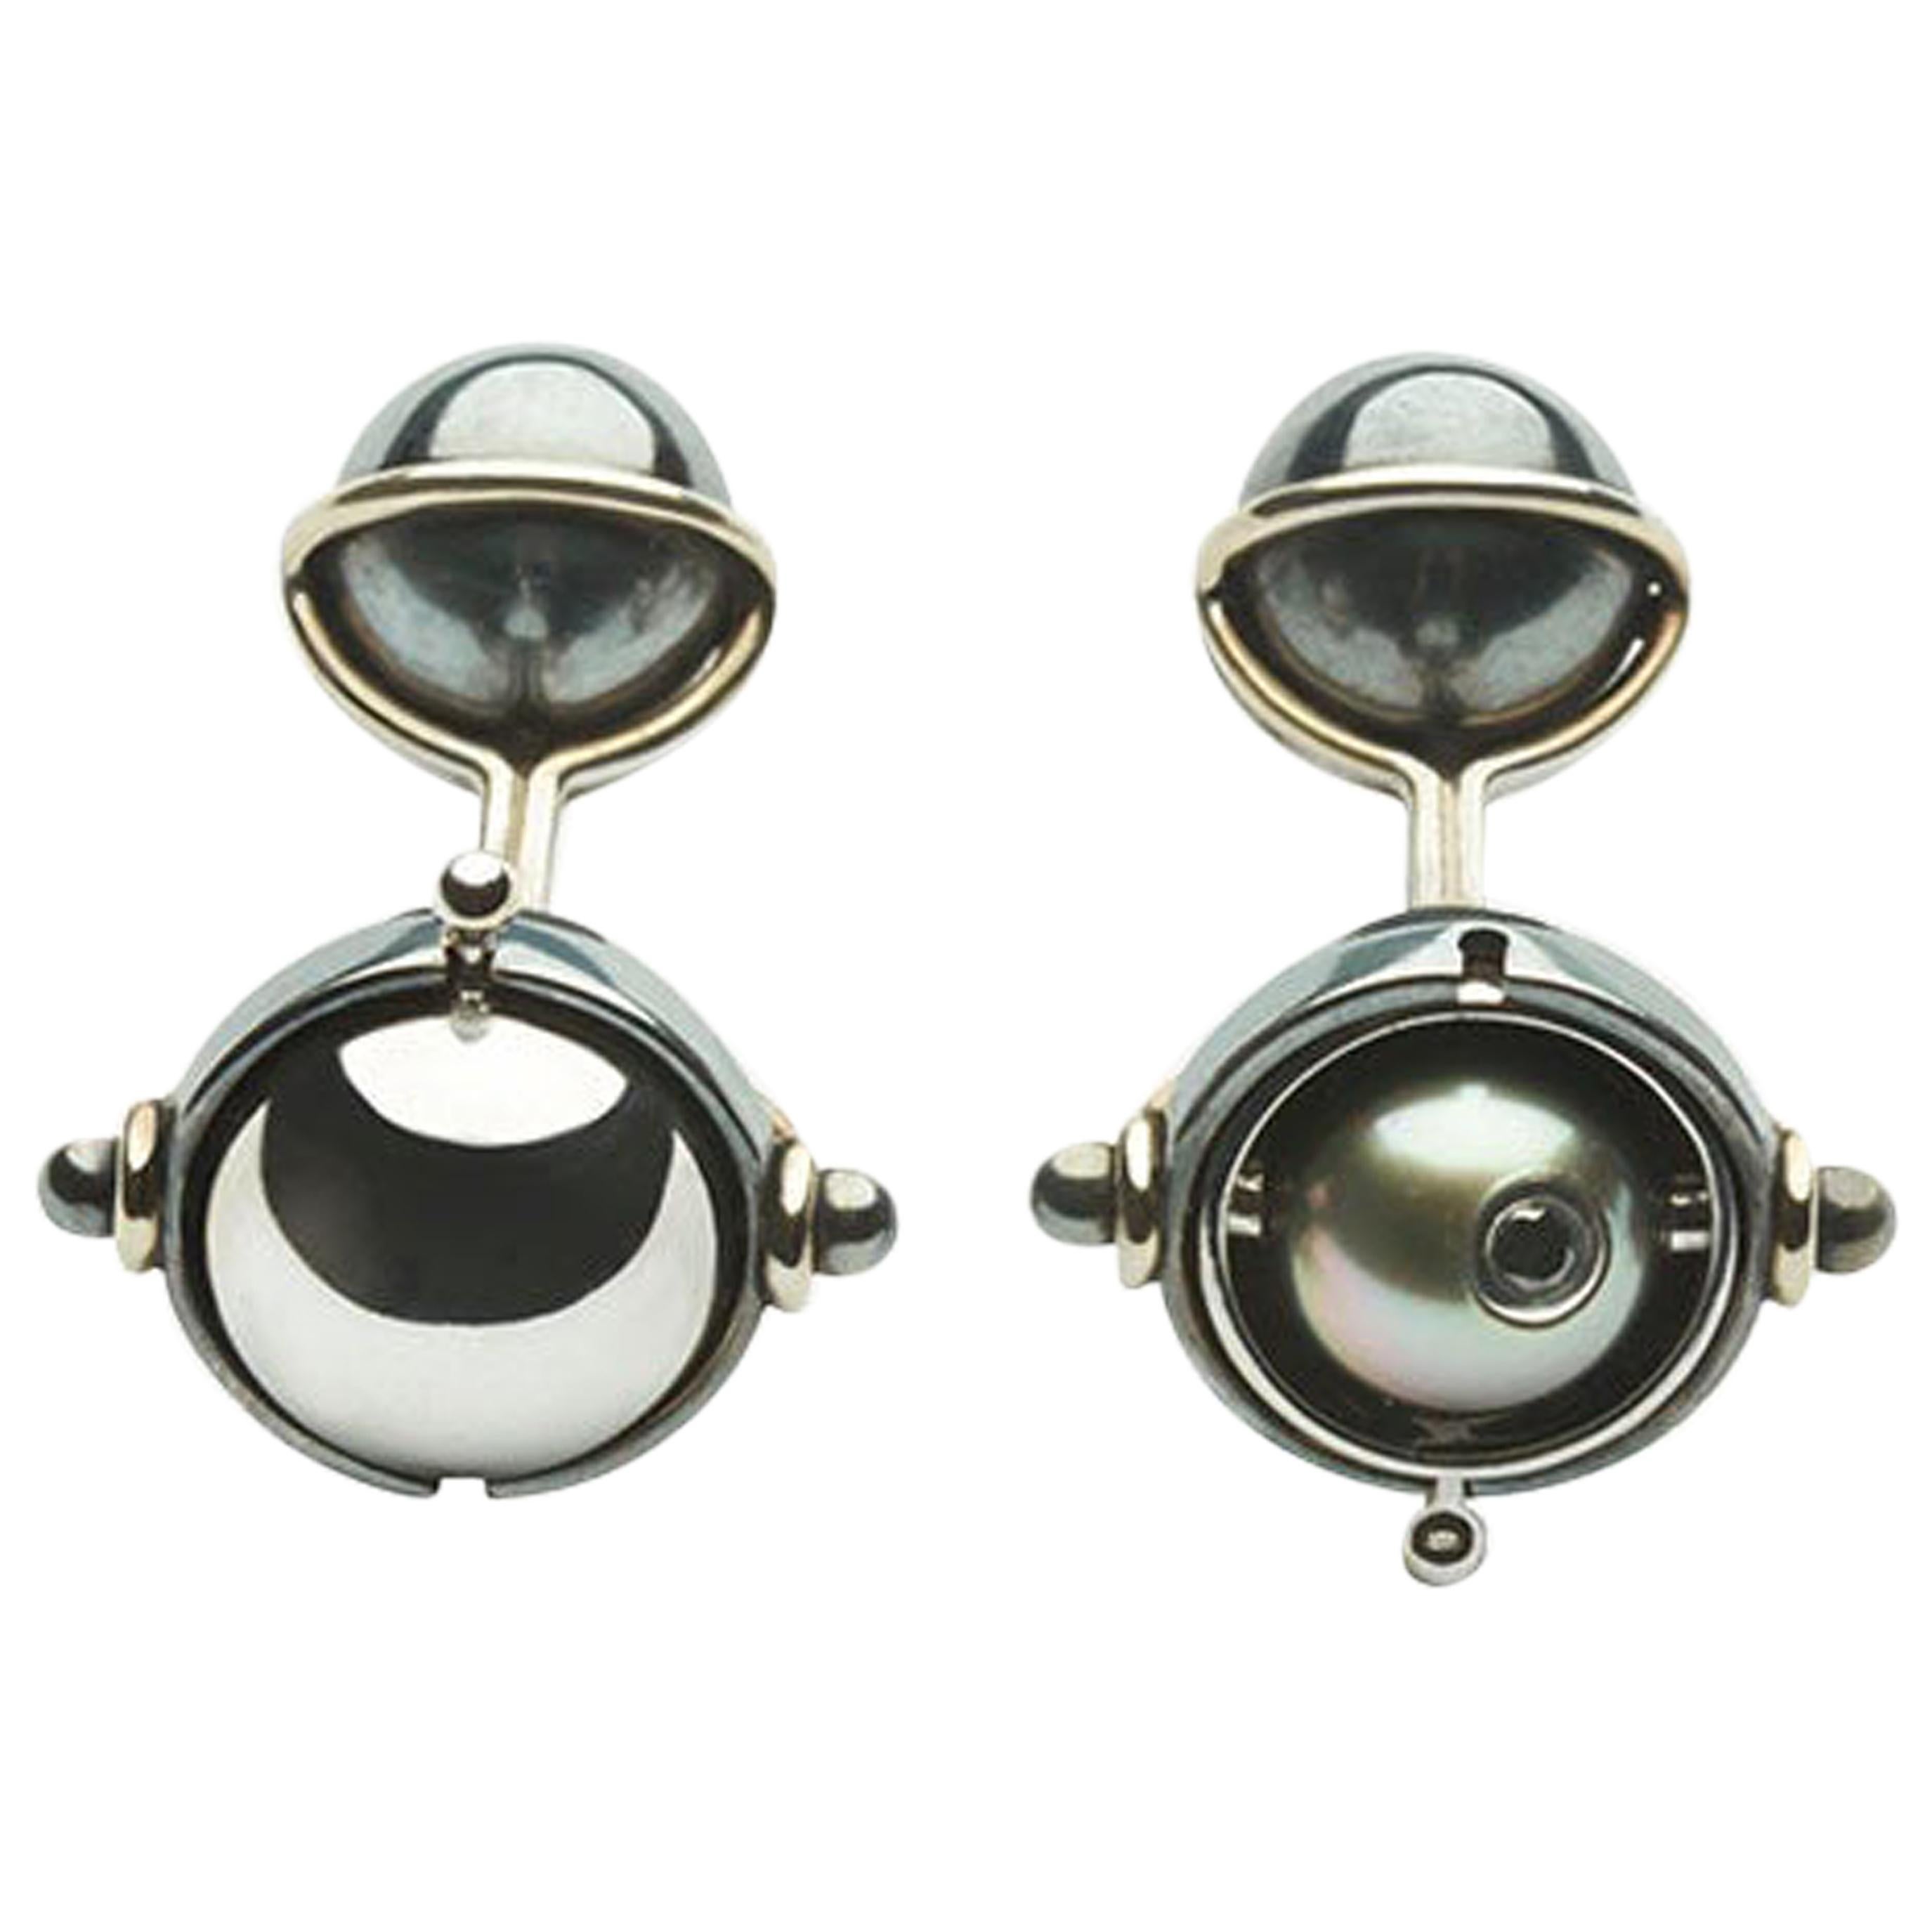 Diamonds Cufflinks set with Tahitian Pearls in 18k white gold by Elie Top